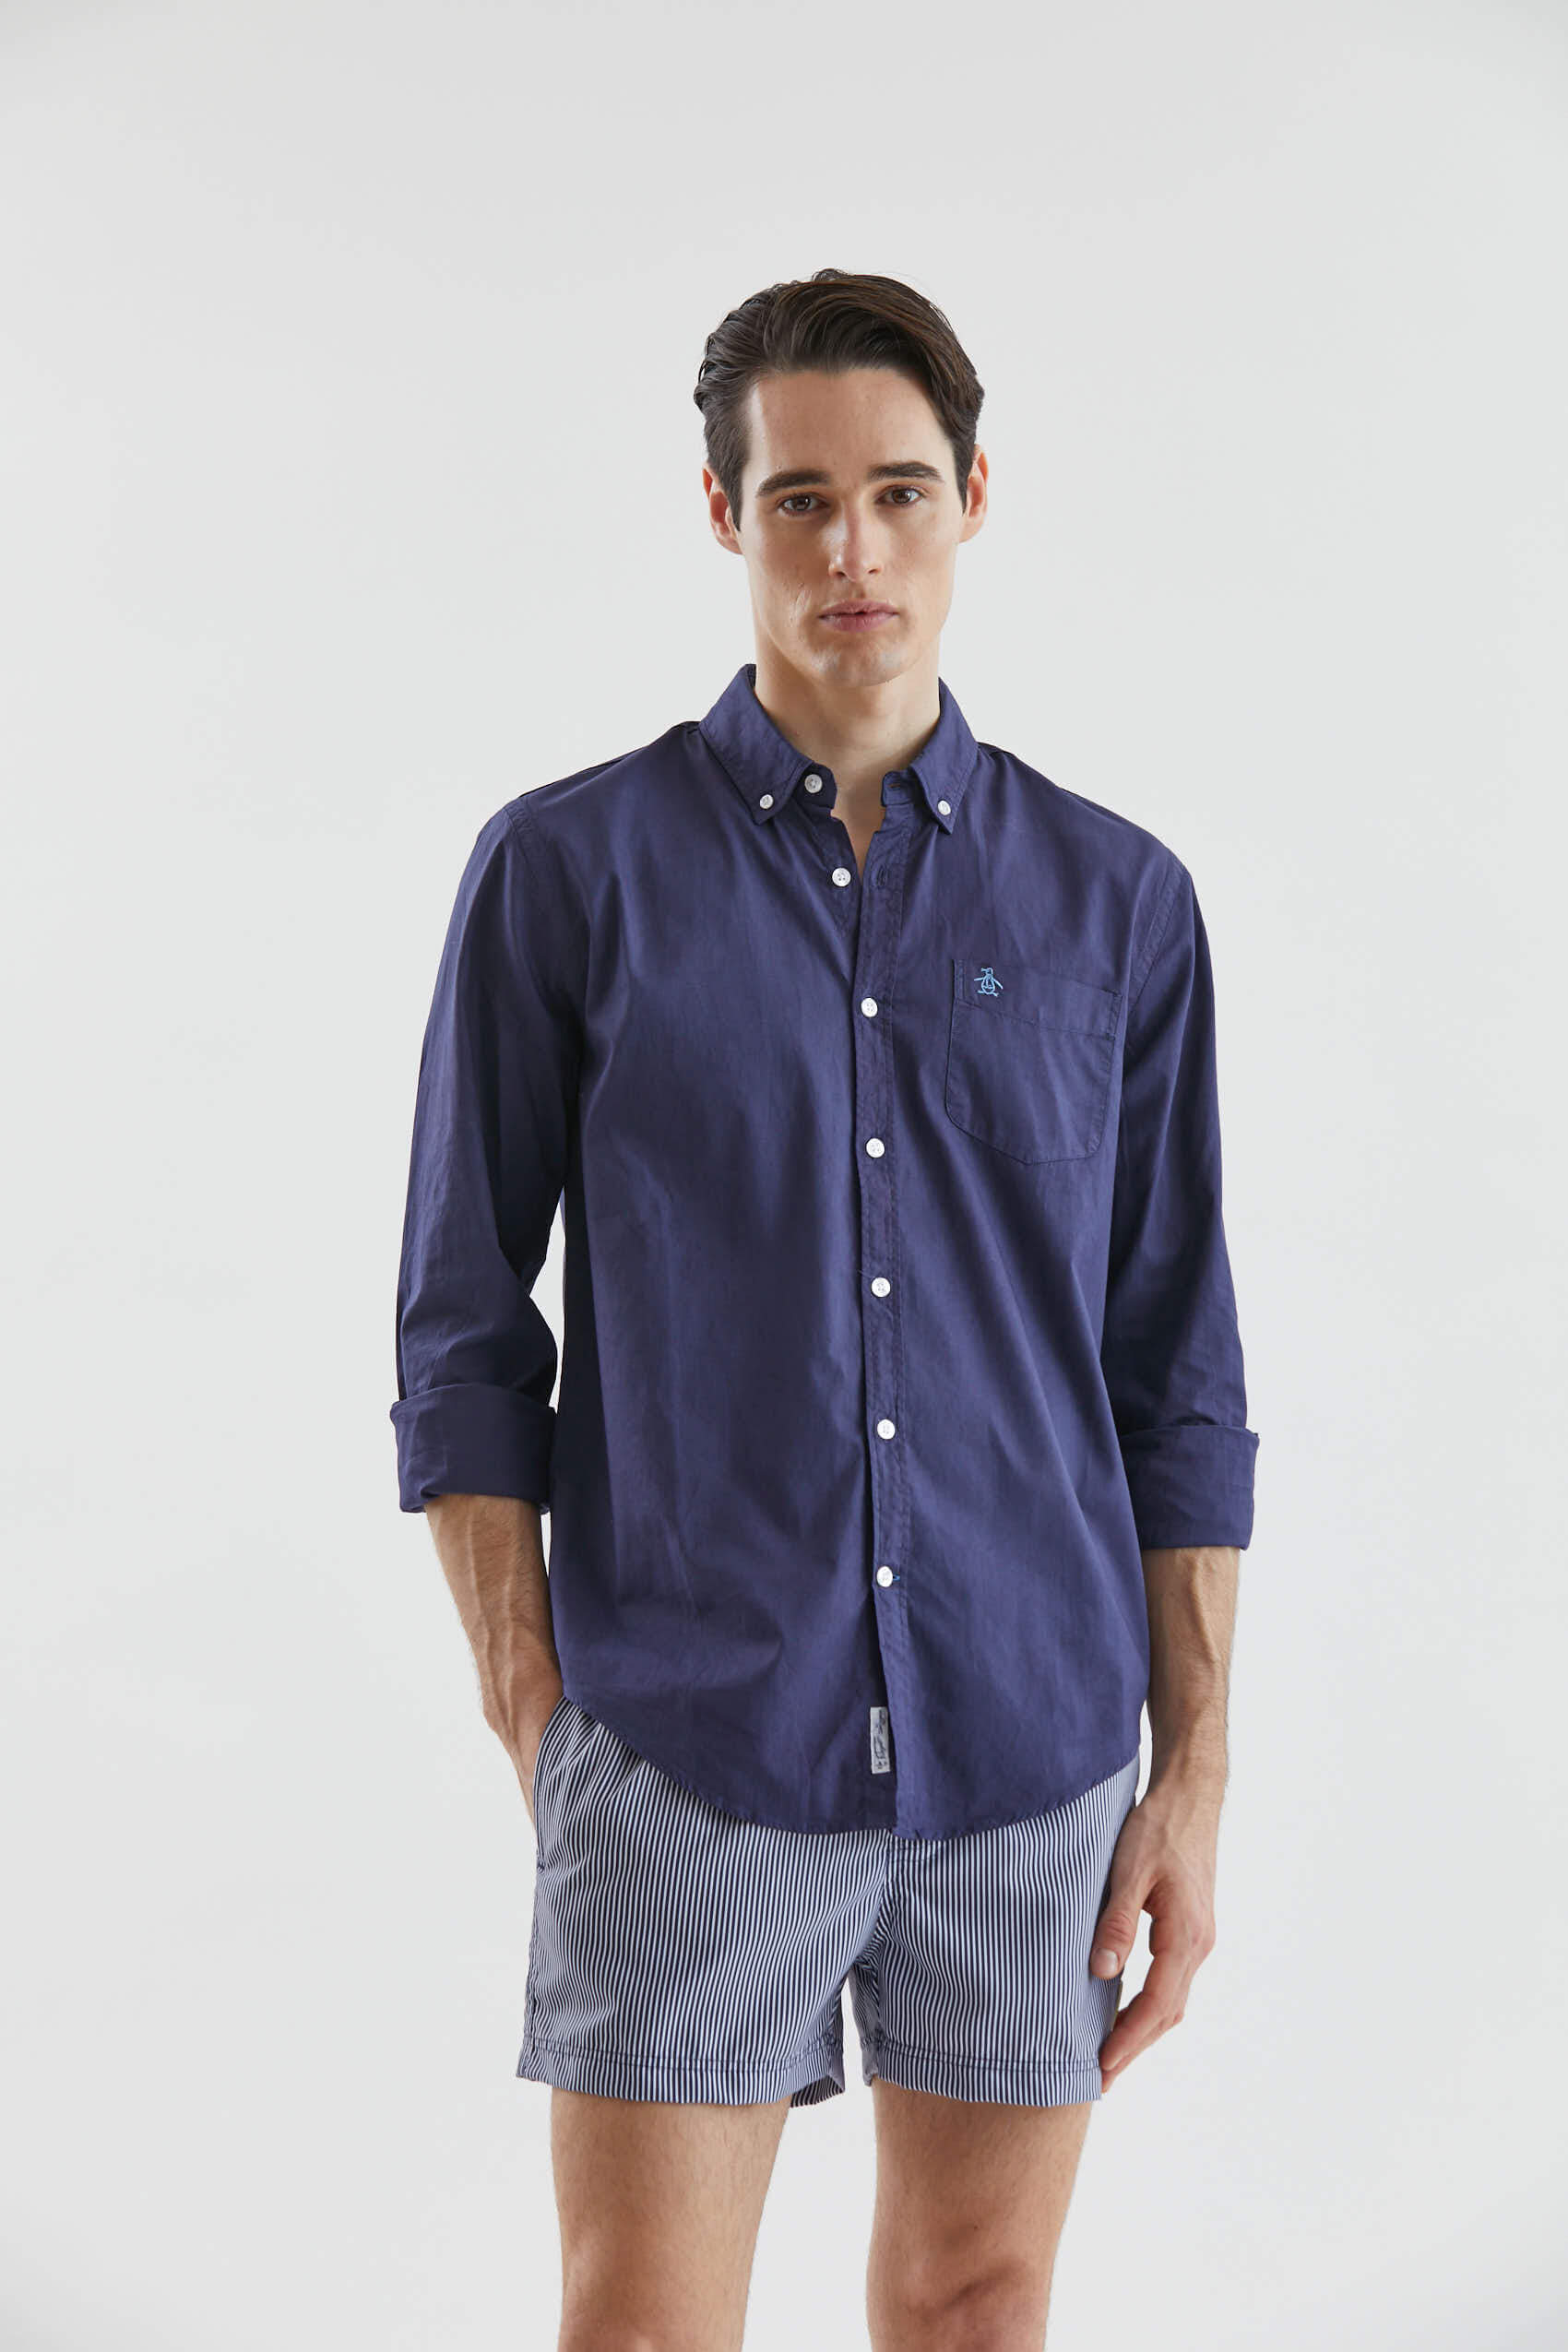 penguin_ls-solid-oxford-bd-w/pkt-shirt_33-24-2023__picture-40965